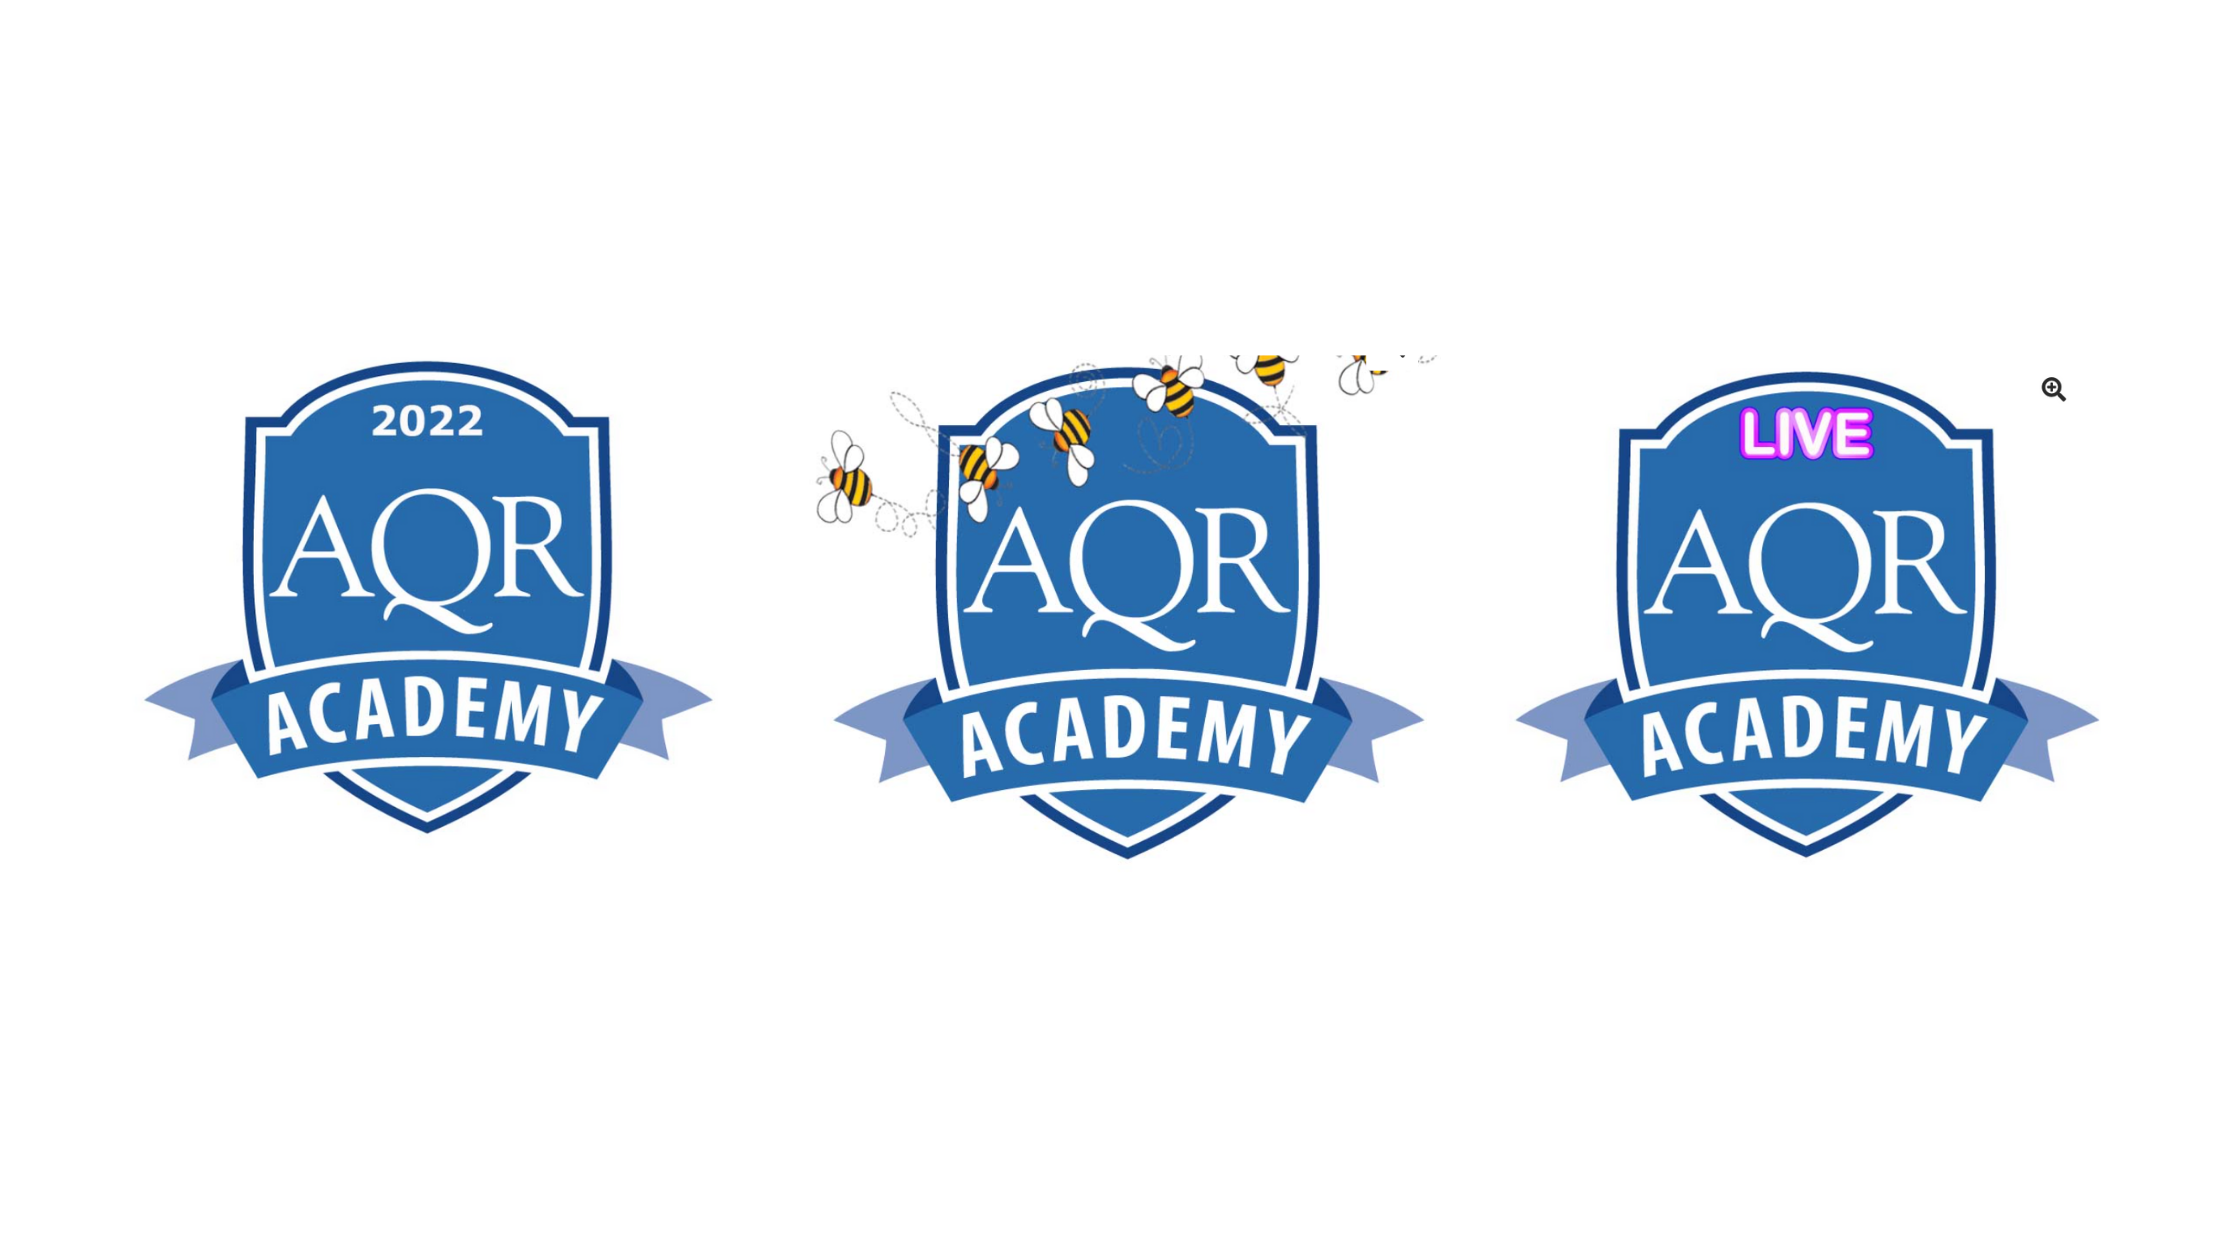 Upcoming AQR Academy